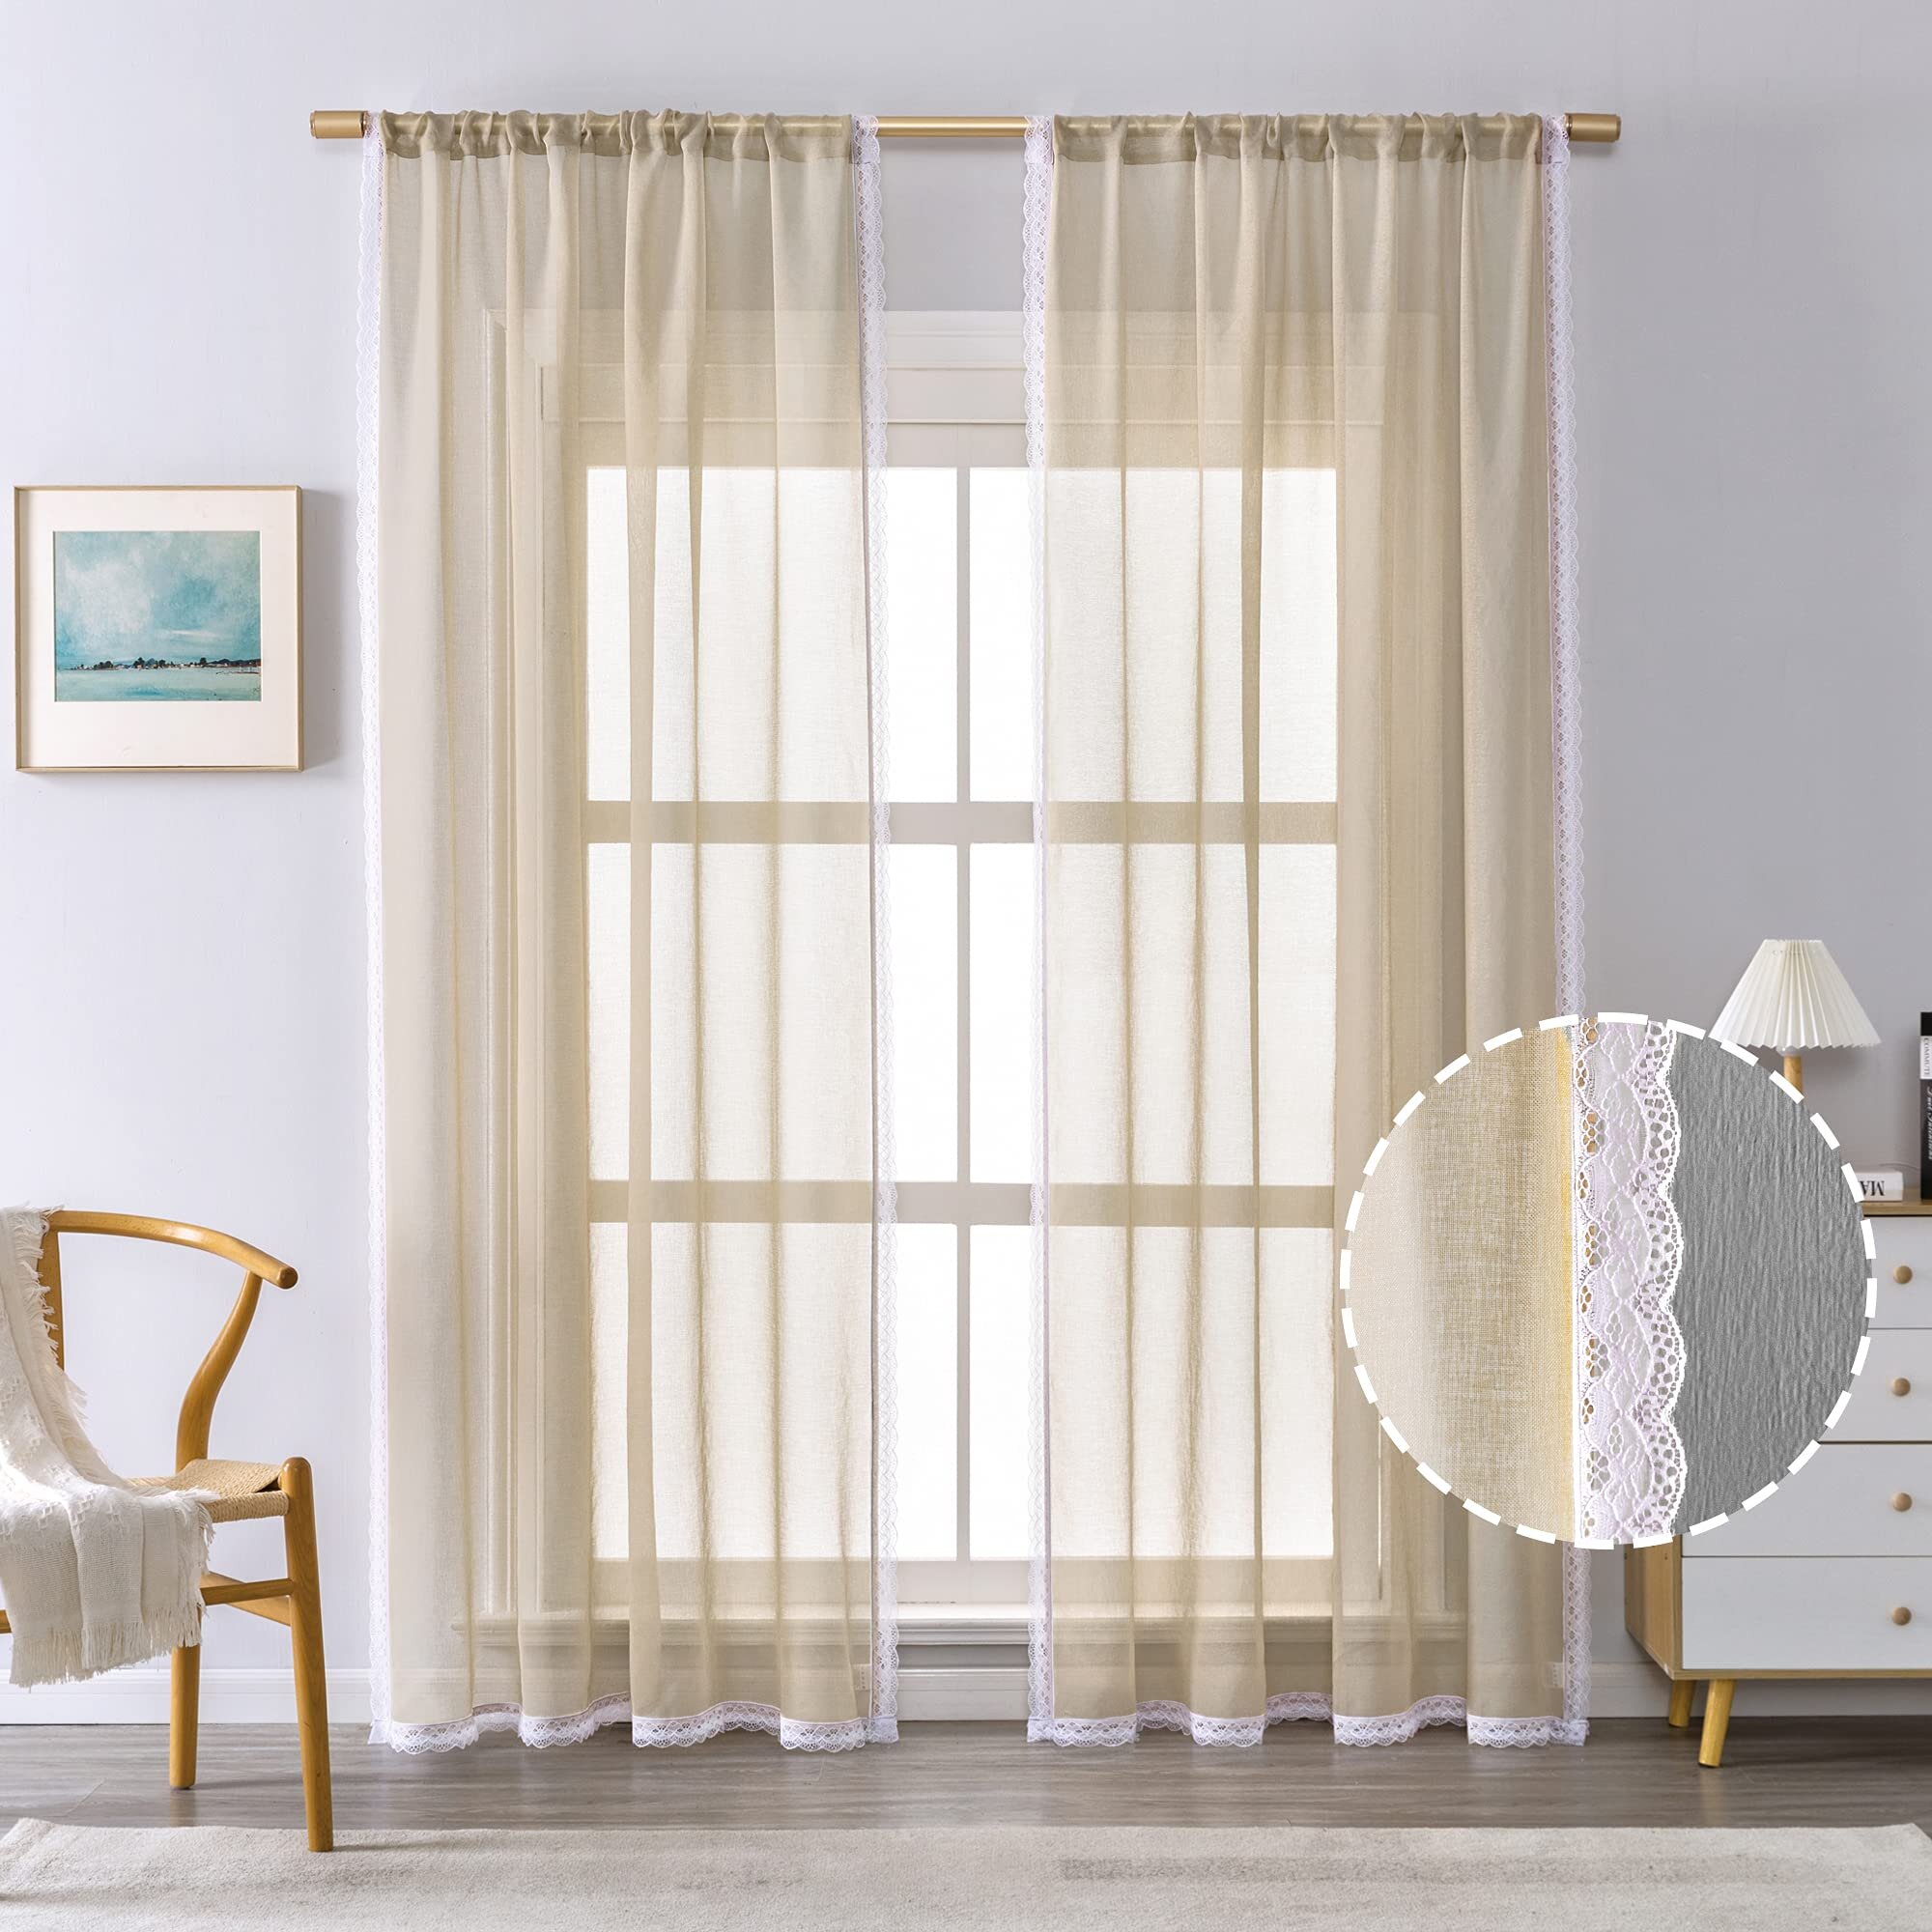 Window Curtains 84 Inch Long Curtain Panels Set Of 2 Drapes For Living Room 